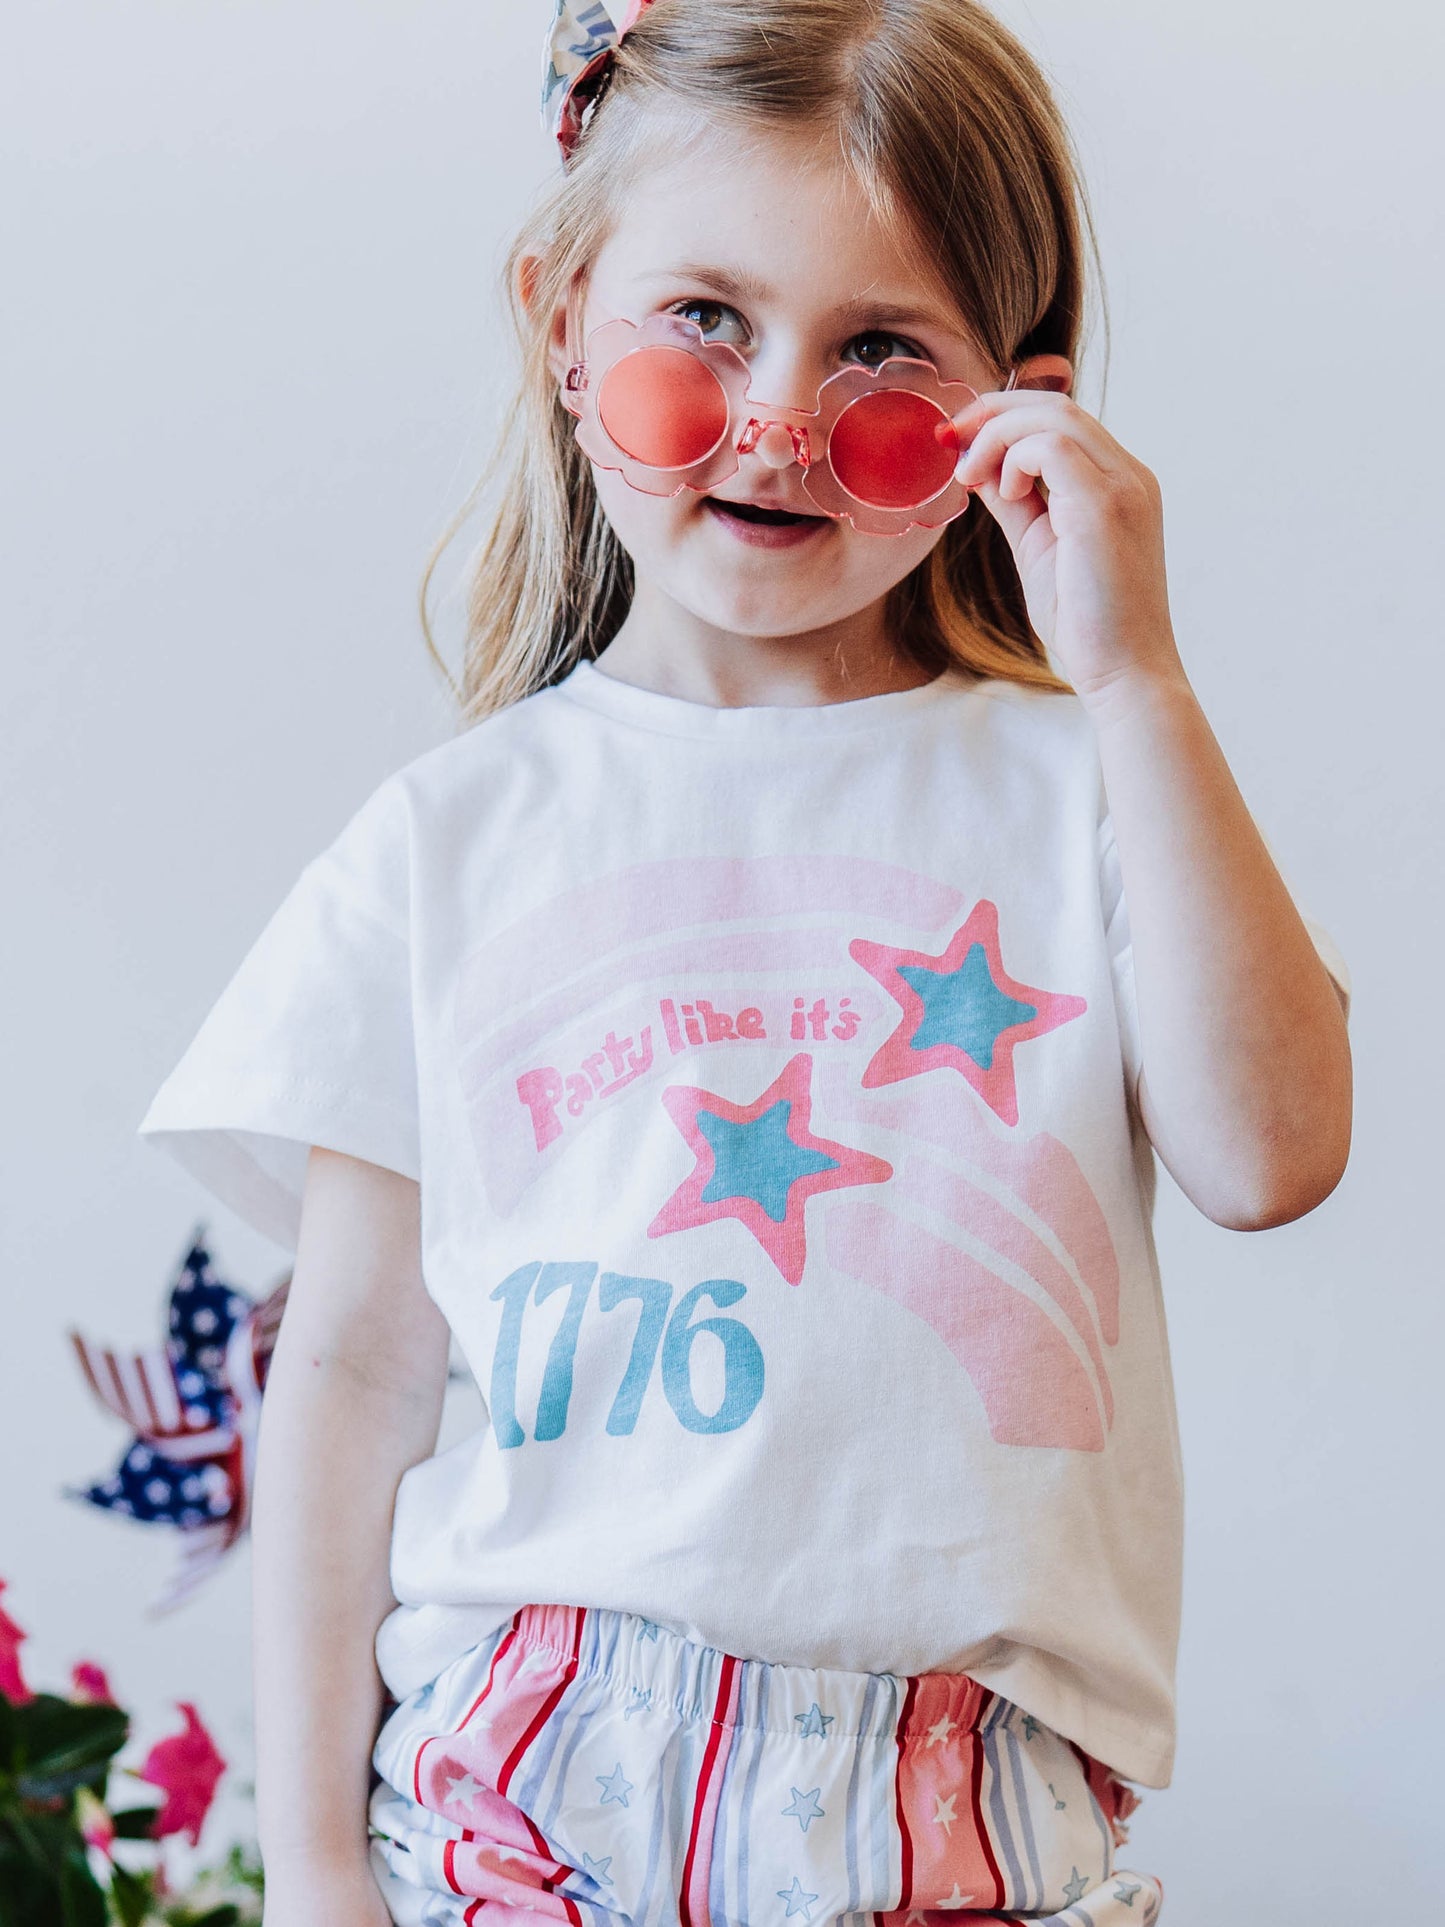 Graphic Tee - Party Like it's 1776